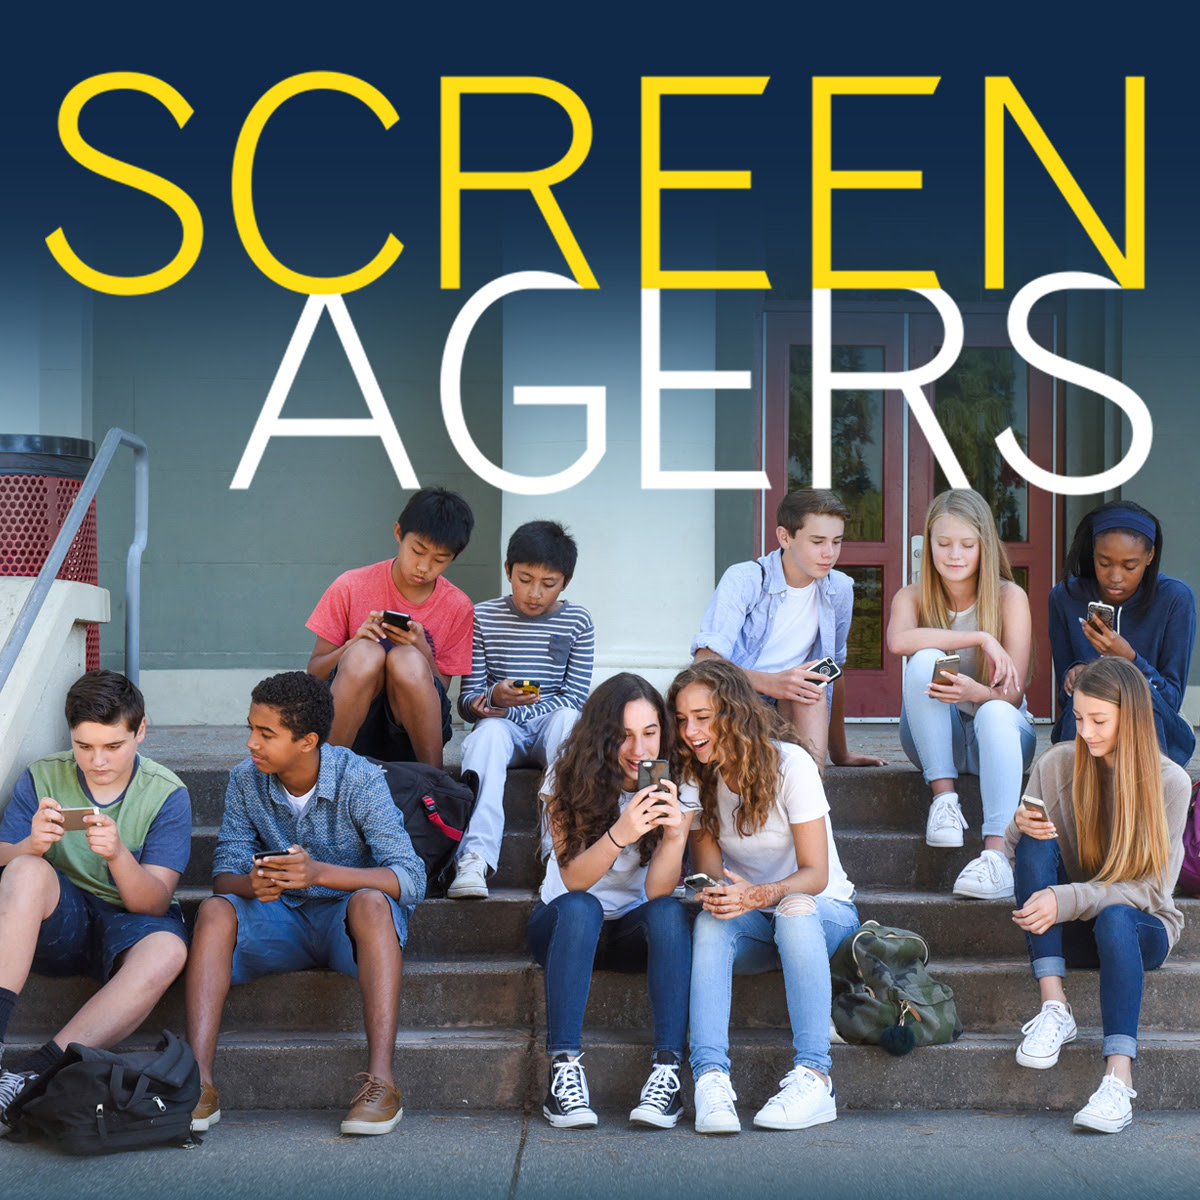 Screenagers Film Presented By Holland Township Education Association